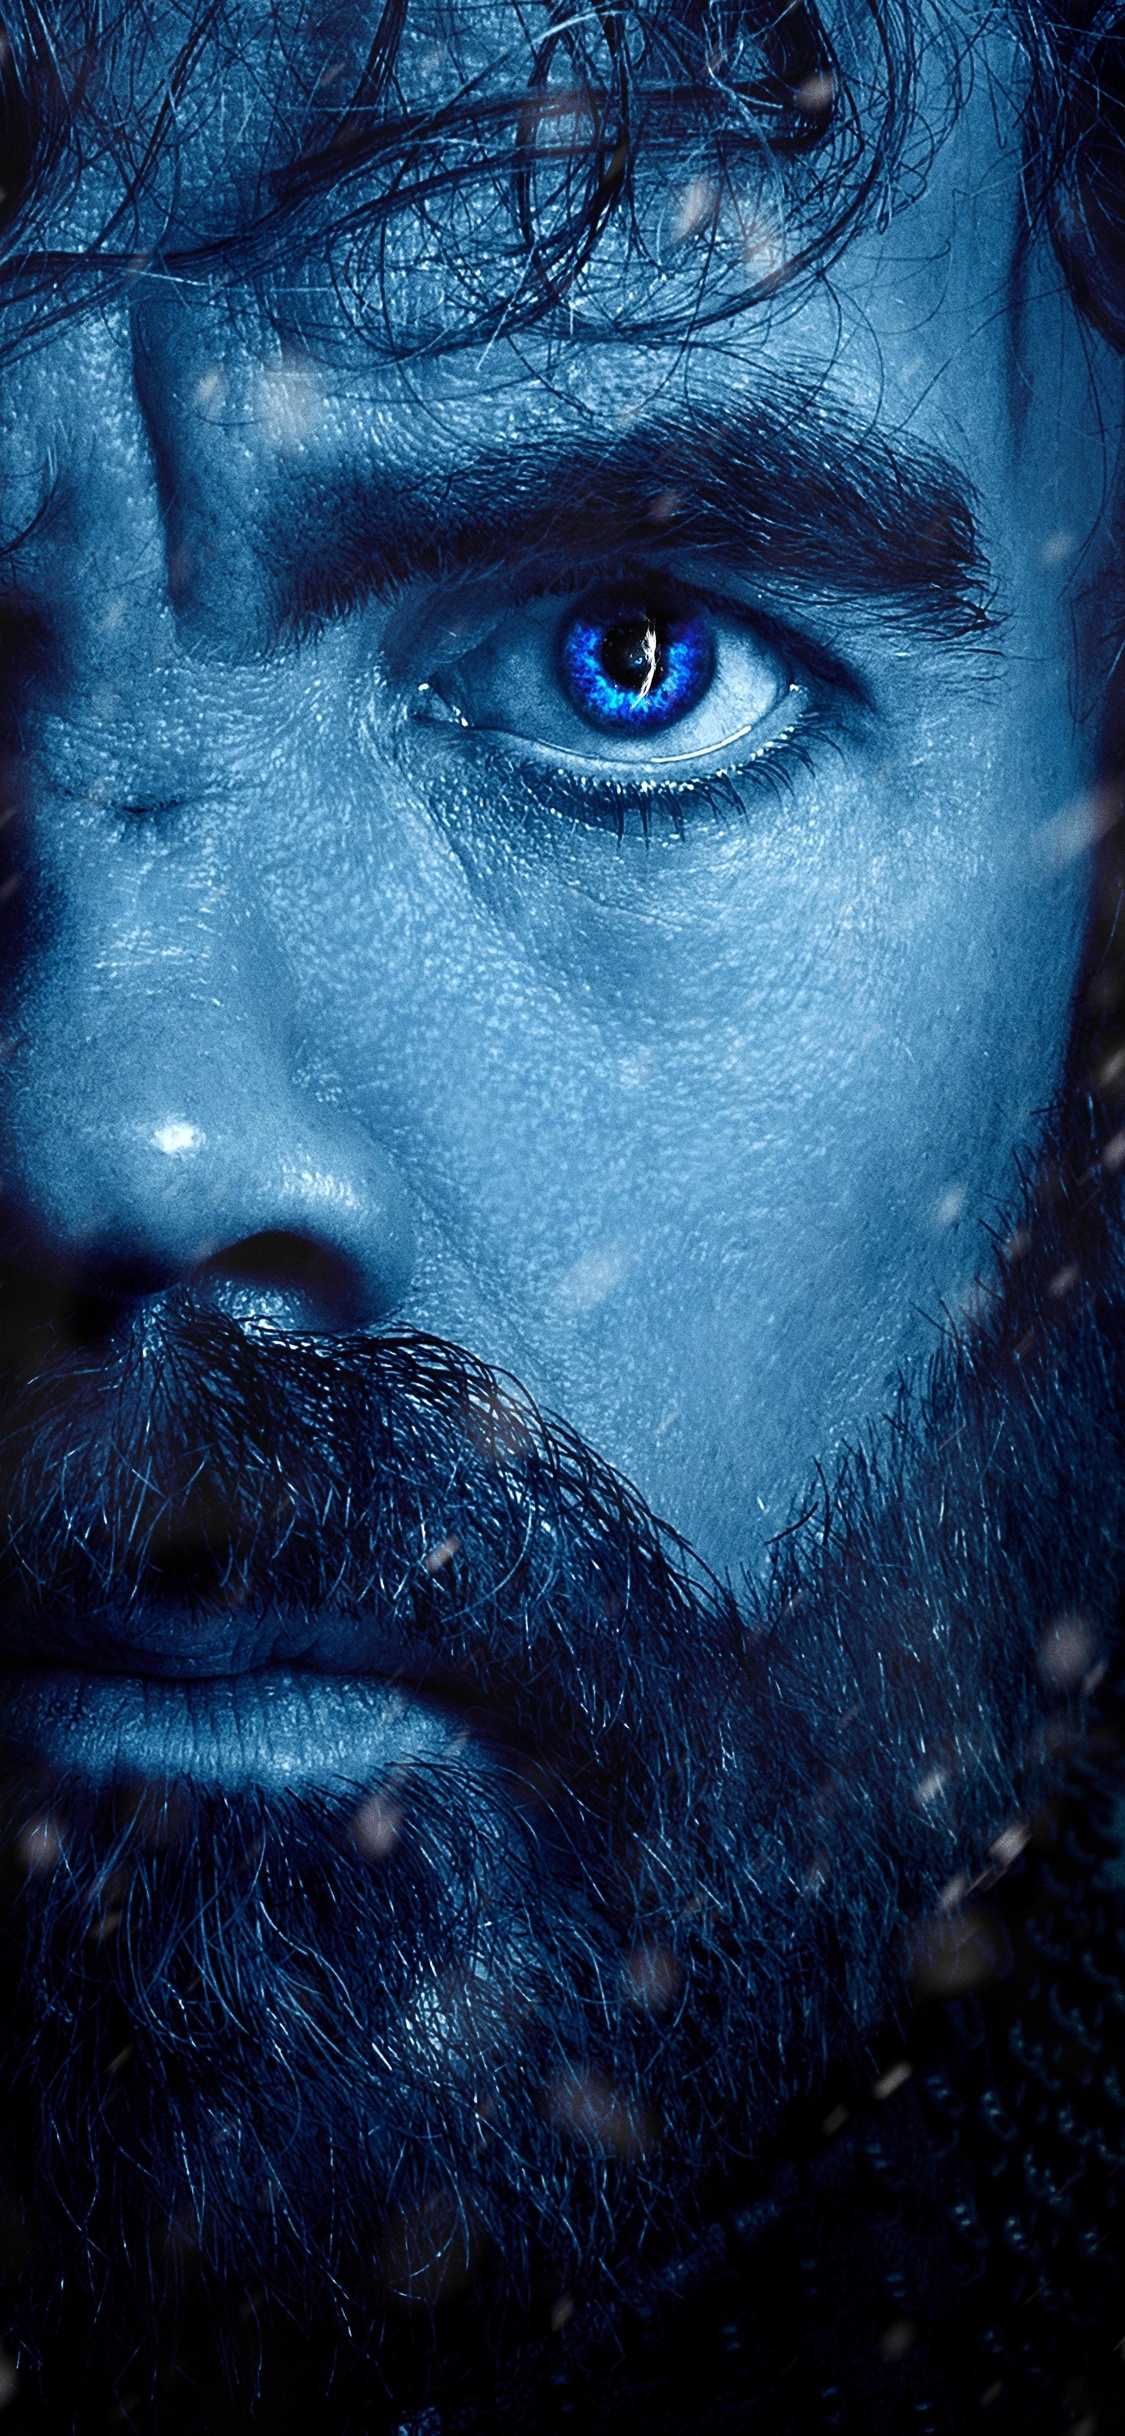 1125x2436 Tyrion Lannister Jaime Lannister Cersei Lannister Posters Game Of  Thrones Season 7 Iphone XS,Iphone 10,Iphone X HD 4k Wallpapers, Images,  Backgrounds, Photos and Pictures